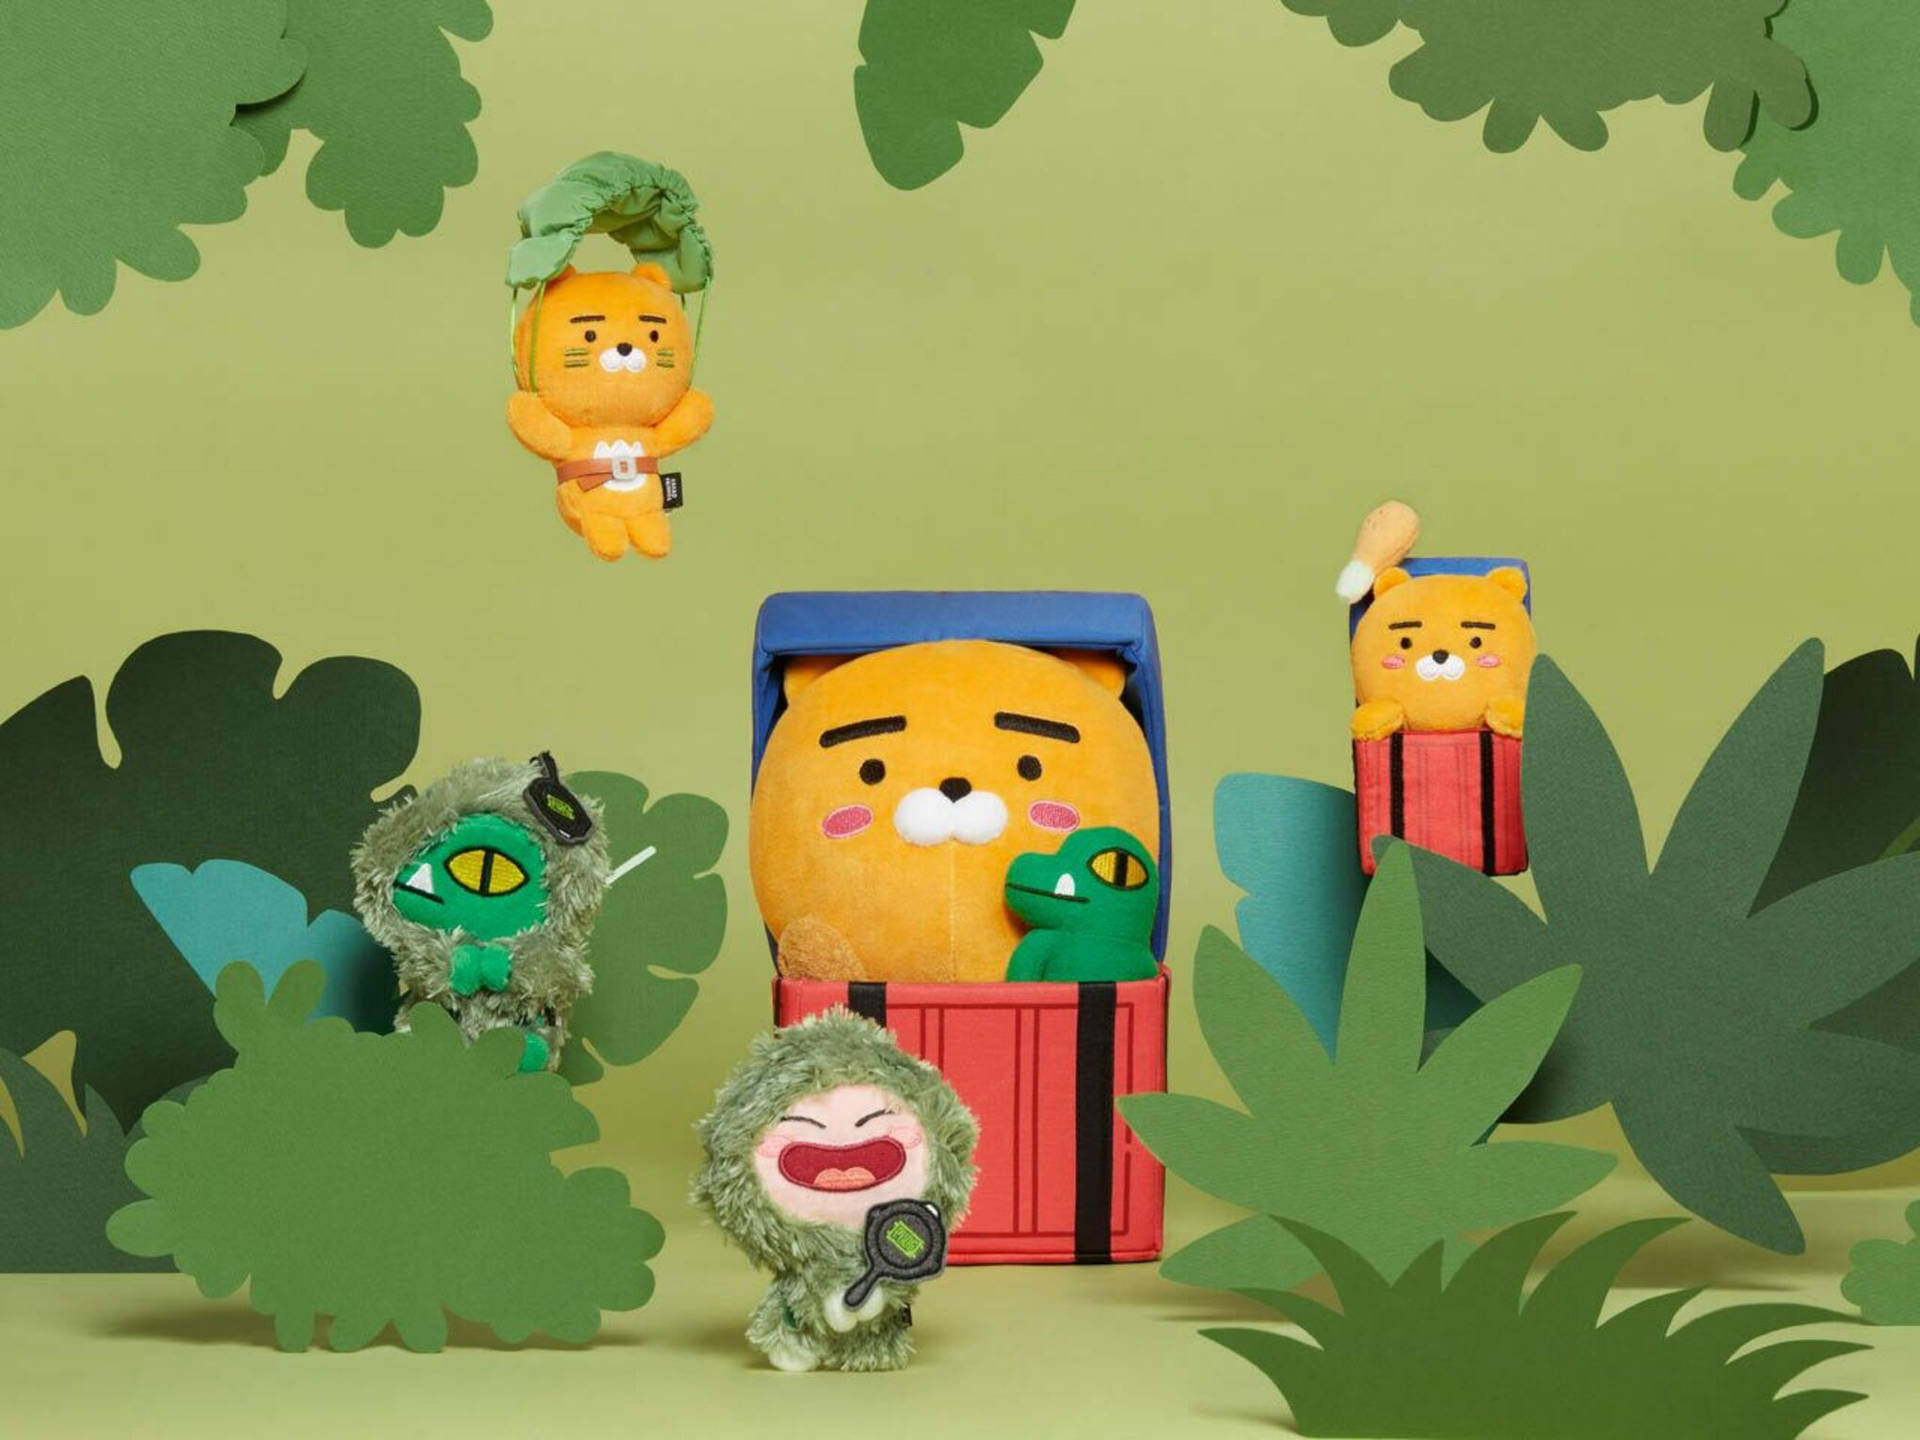 Join The Gang Of Fun And Adventure With The Kakao Friends At The Green Jungle! Background